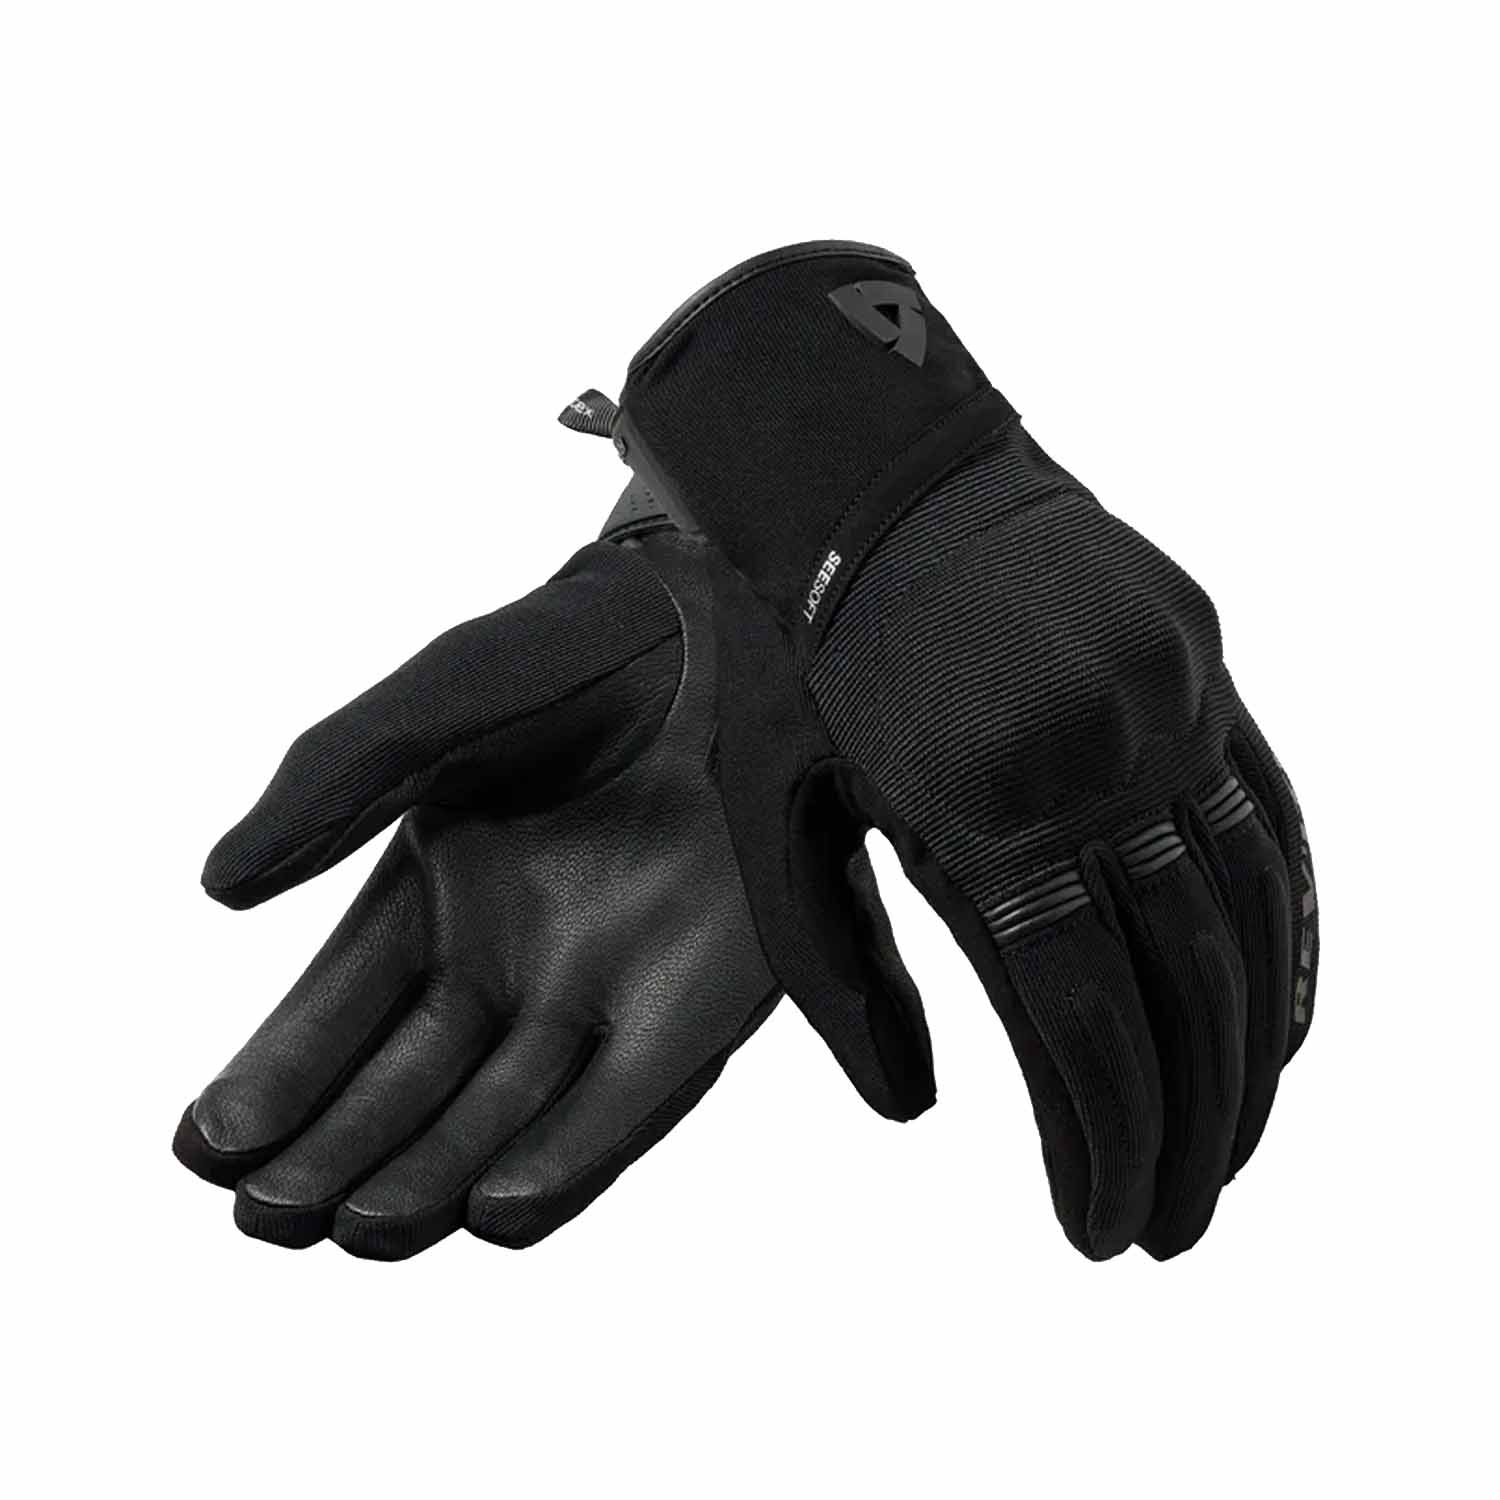 Image of REV'IT! Mosca 2 H2O Gloves Ladies Black Size M ID 8700001378079